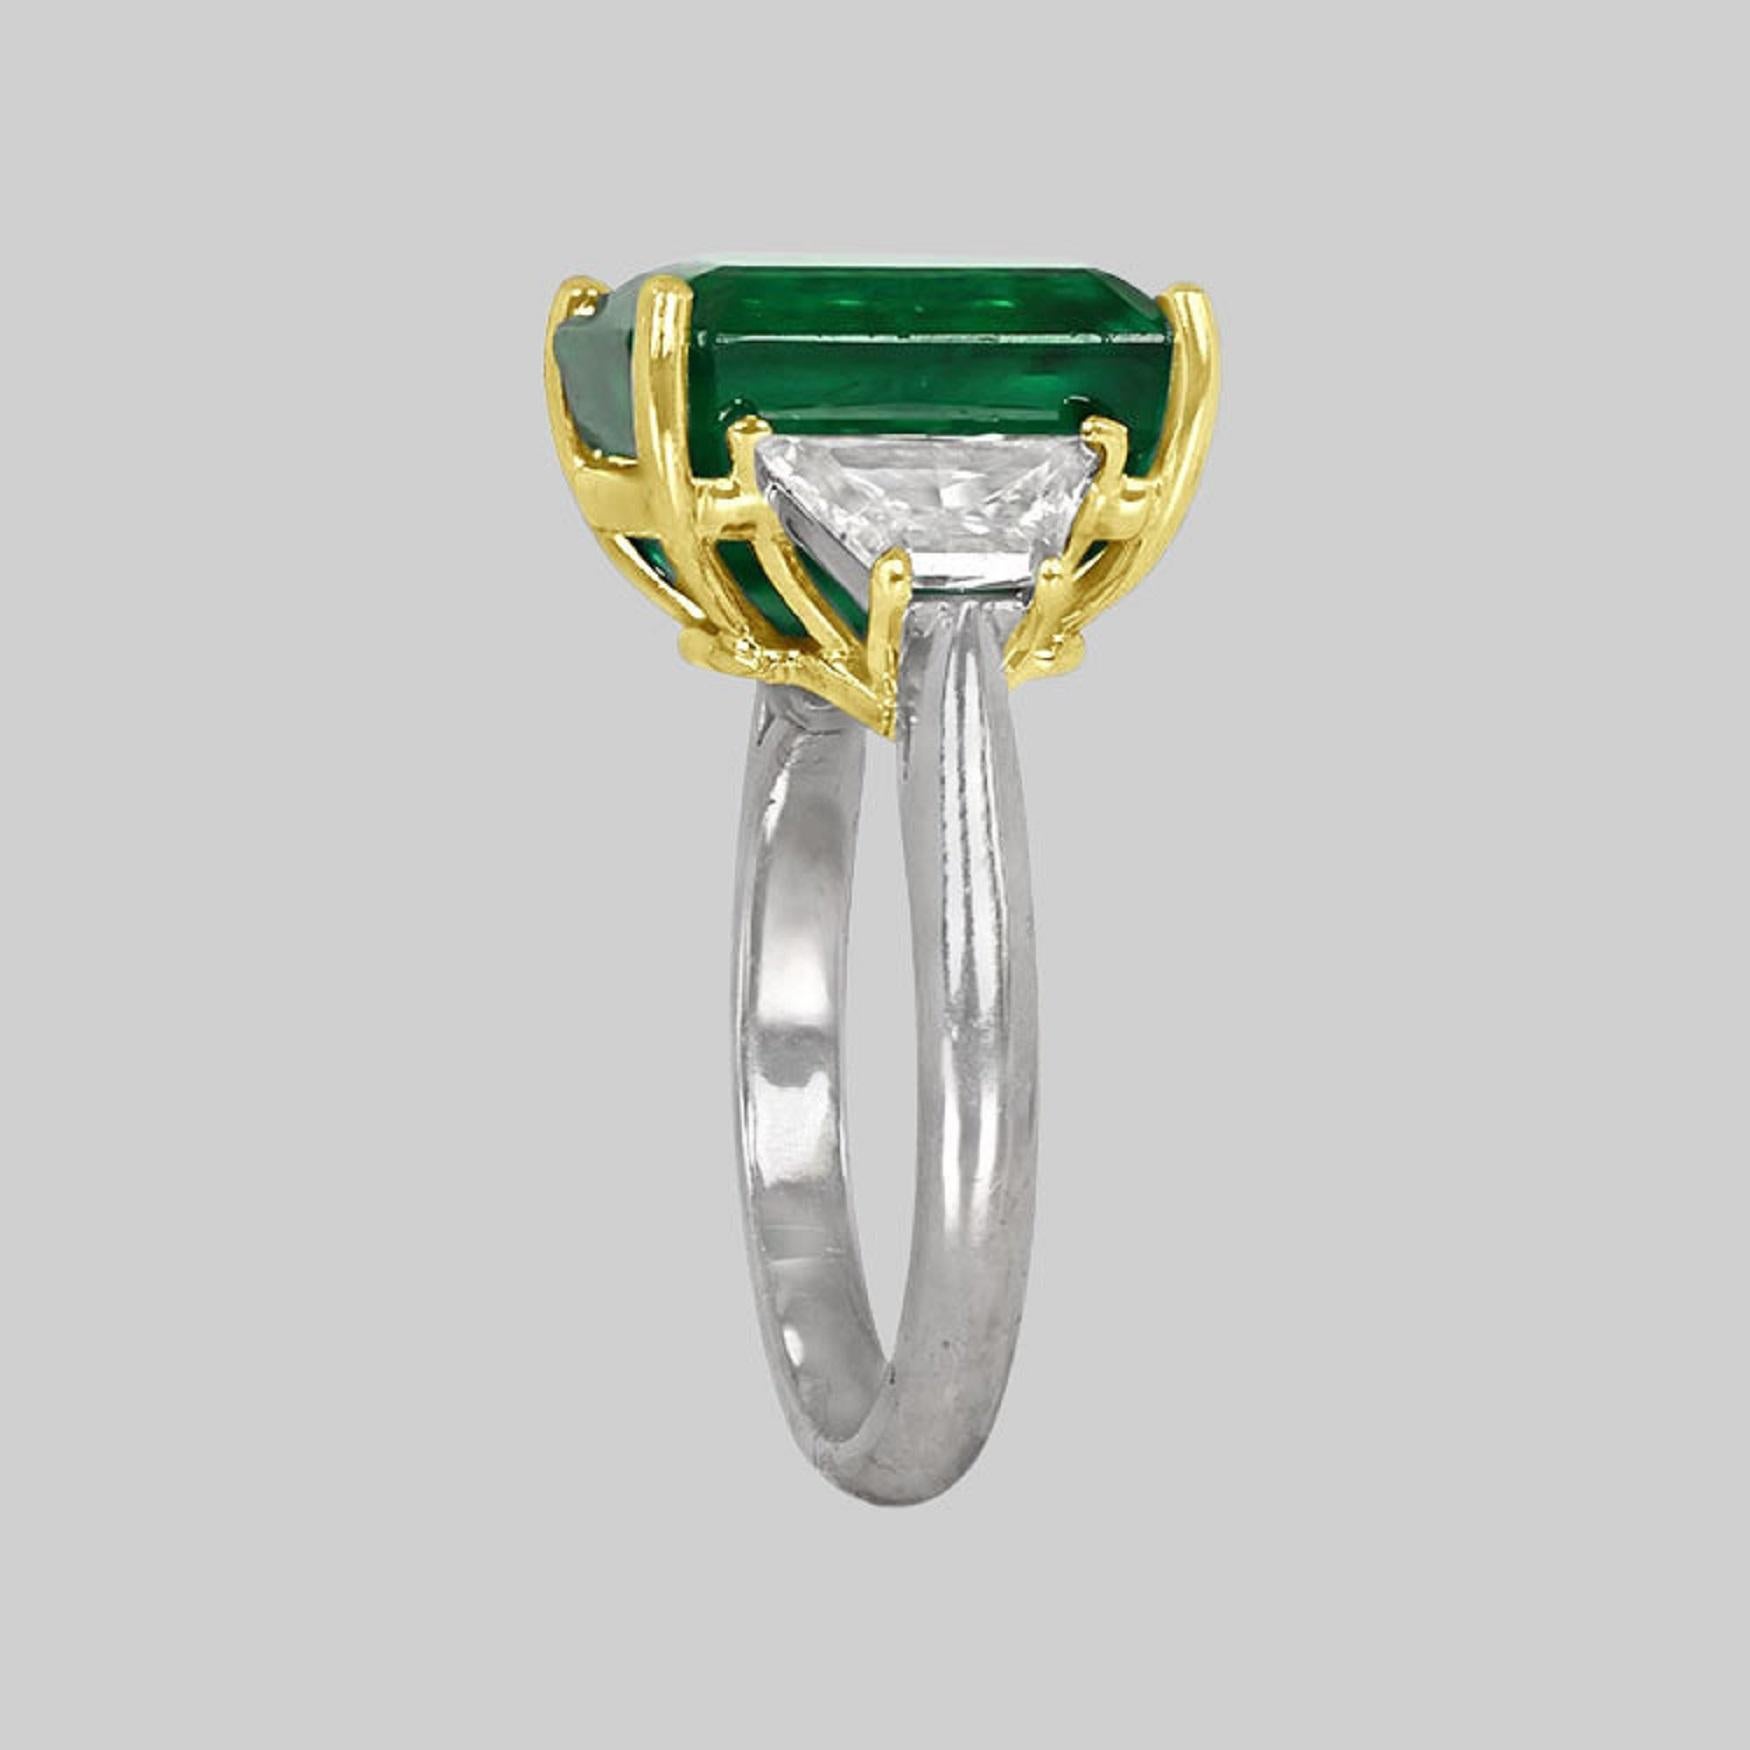 An exquisite minor oil emerald of important dimensions 7.97 carat 
